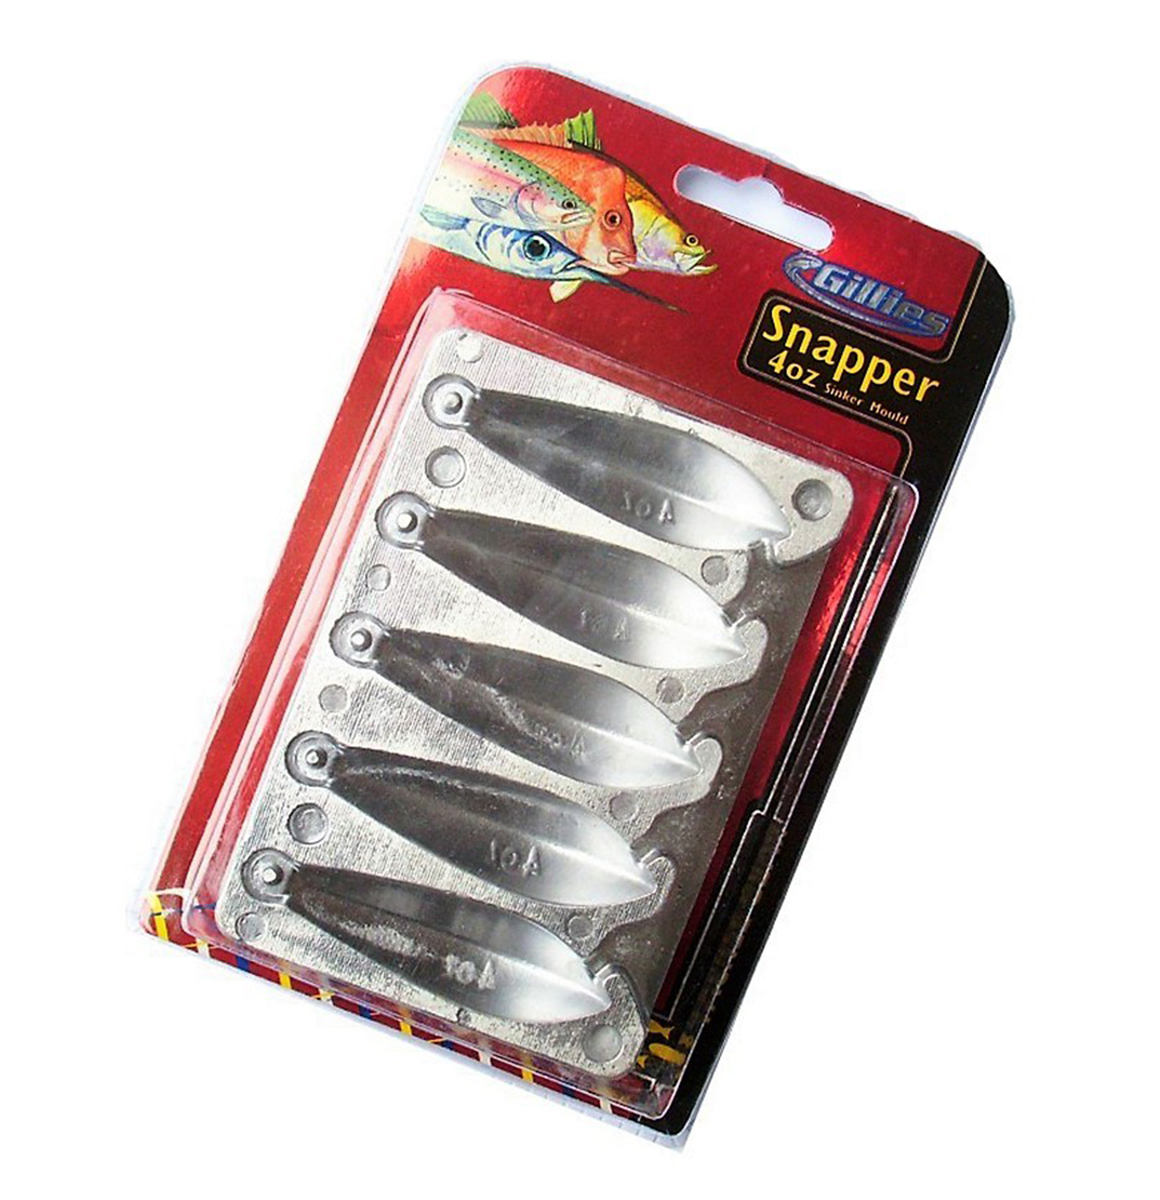 Gillies 4oz Snapper Sinker Mould - Makes 5 Snapper Sinkers at a